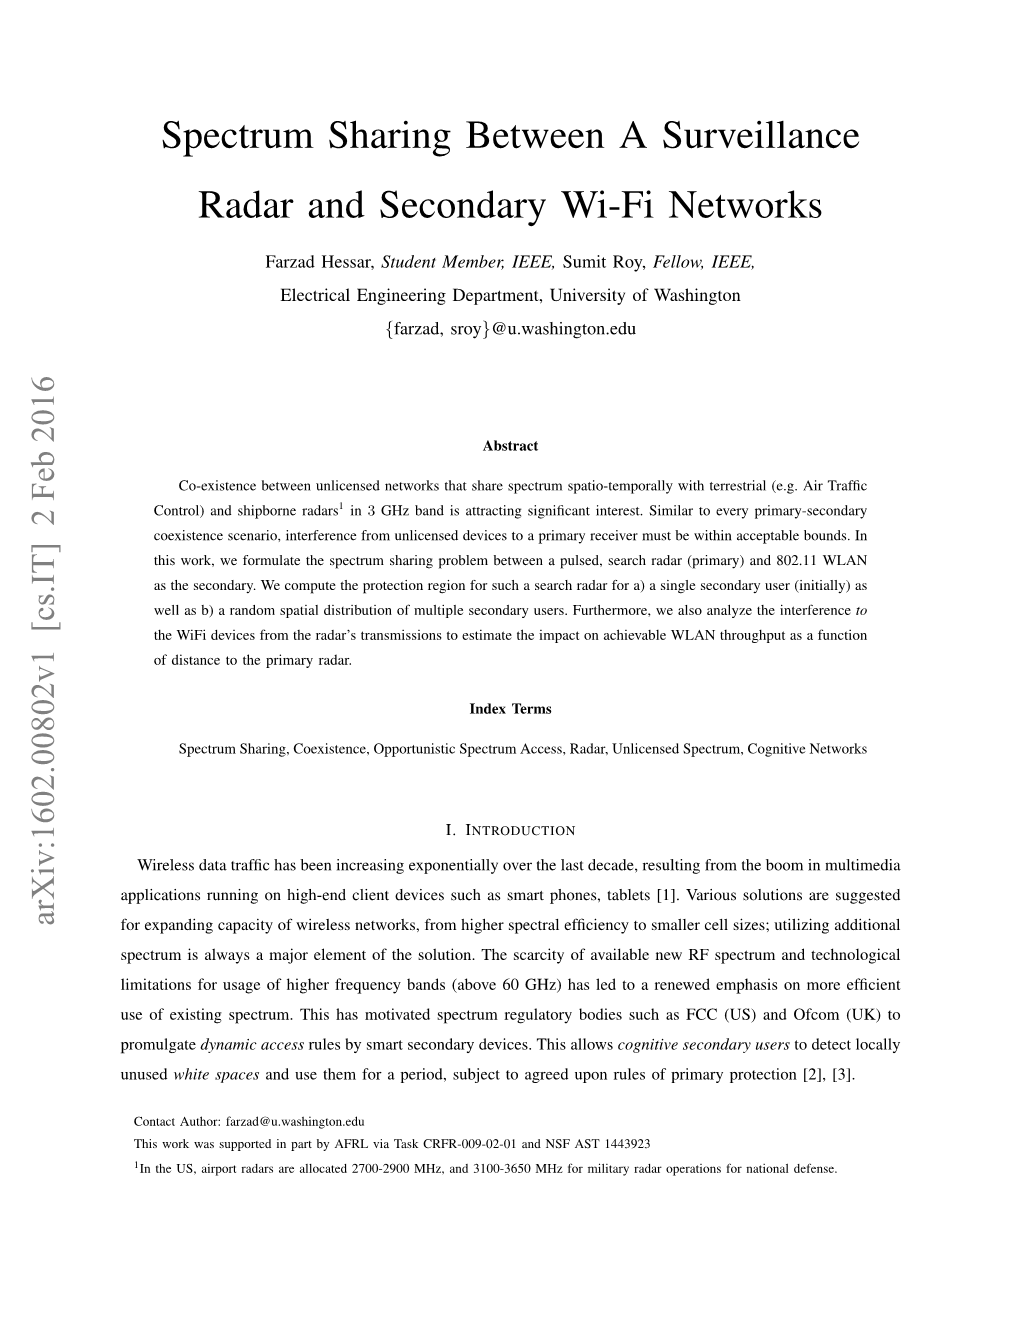 Spectrum Sharing Between a Surveillance Radar and Secondary Wi-Fi Networks